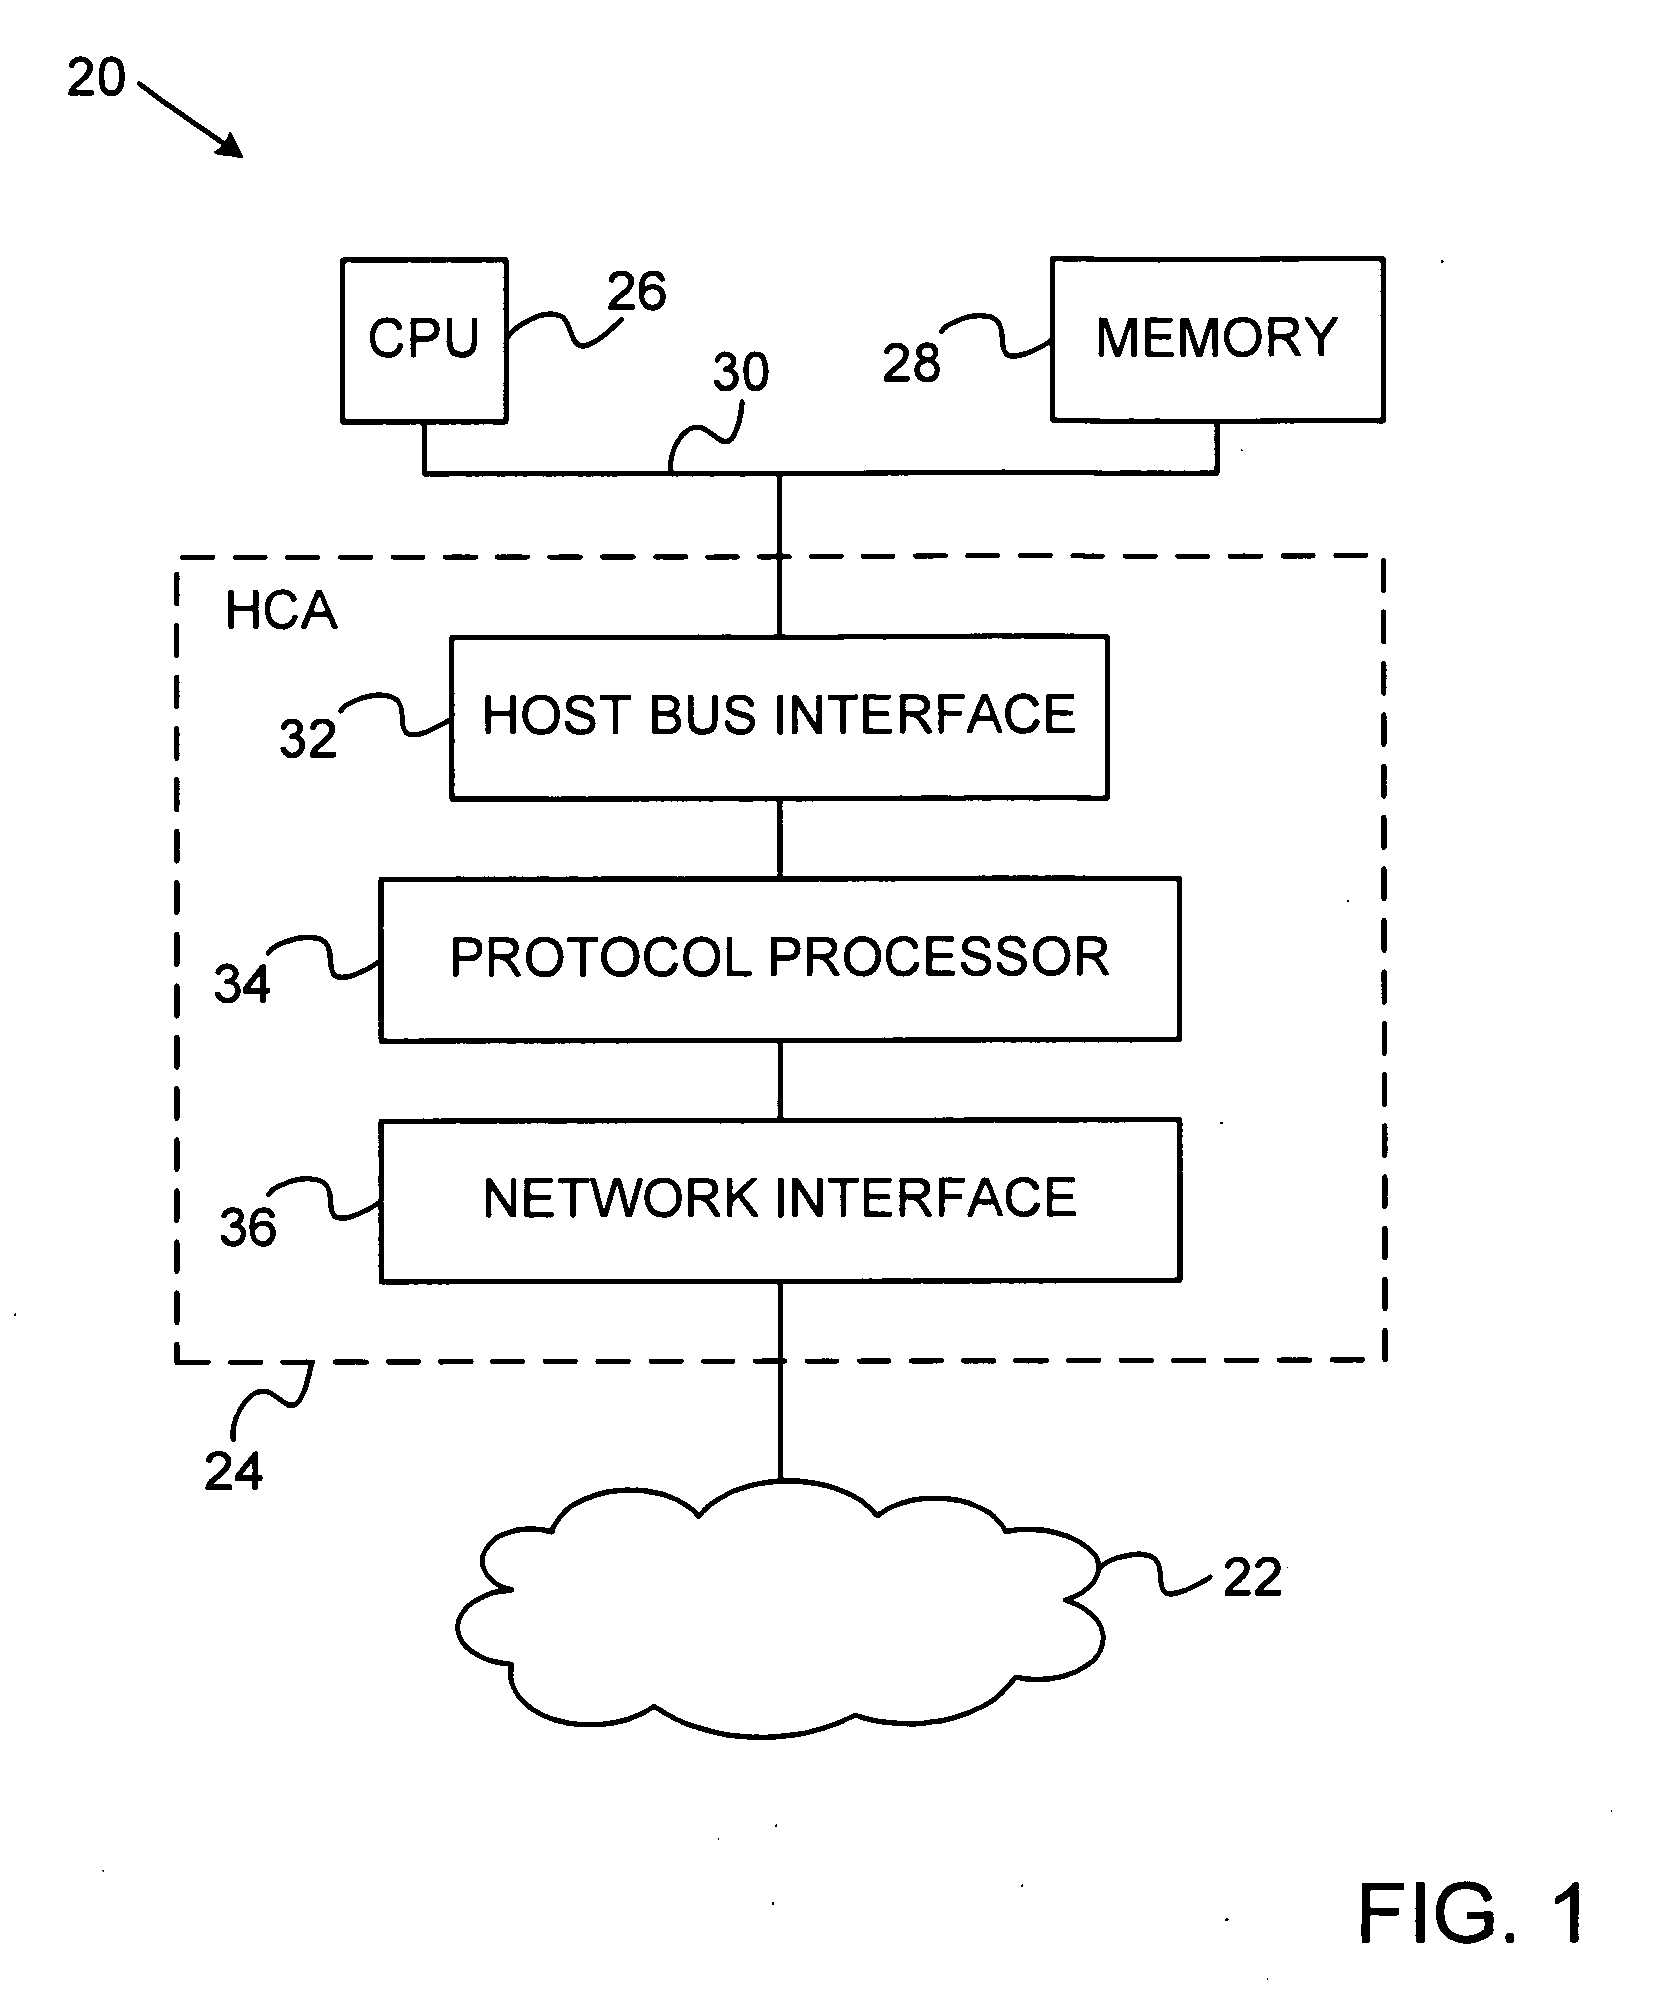 Network interface device with memory management capabilities